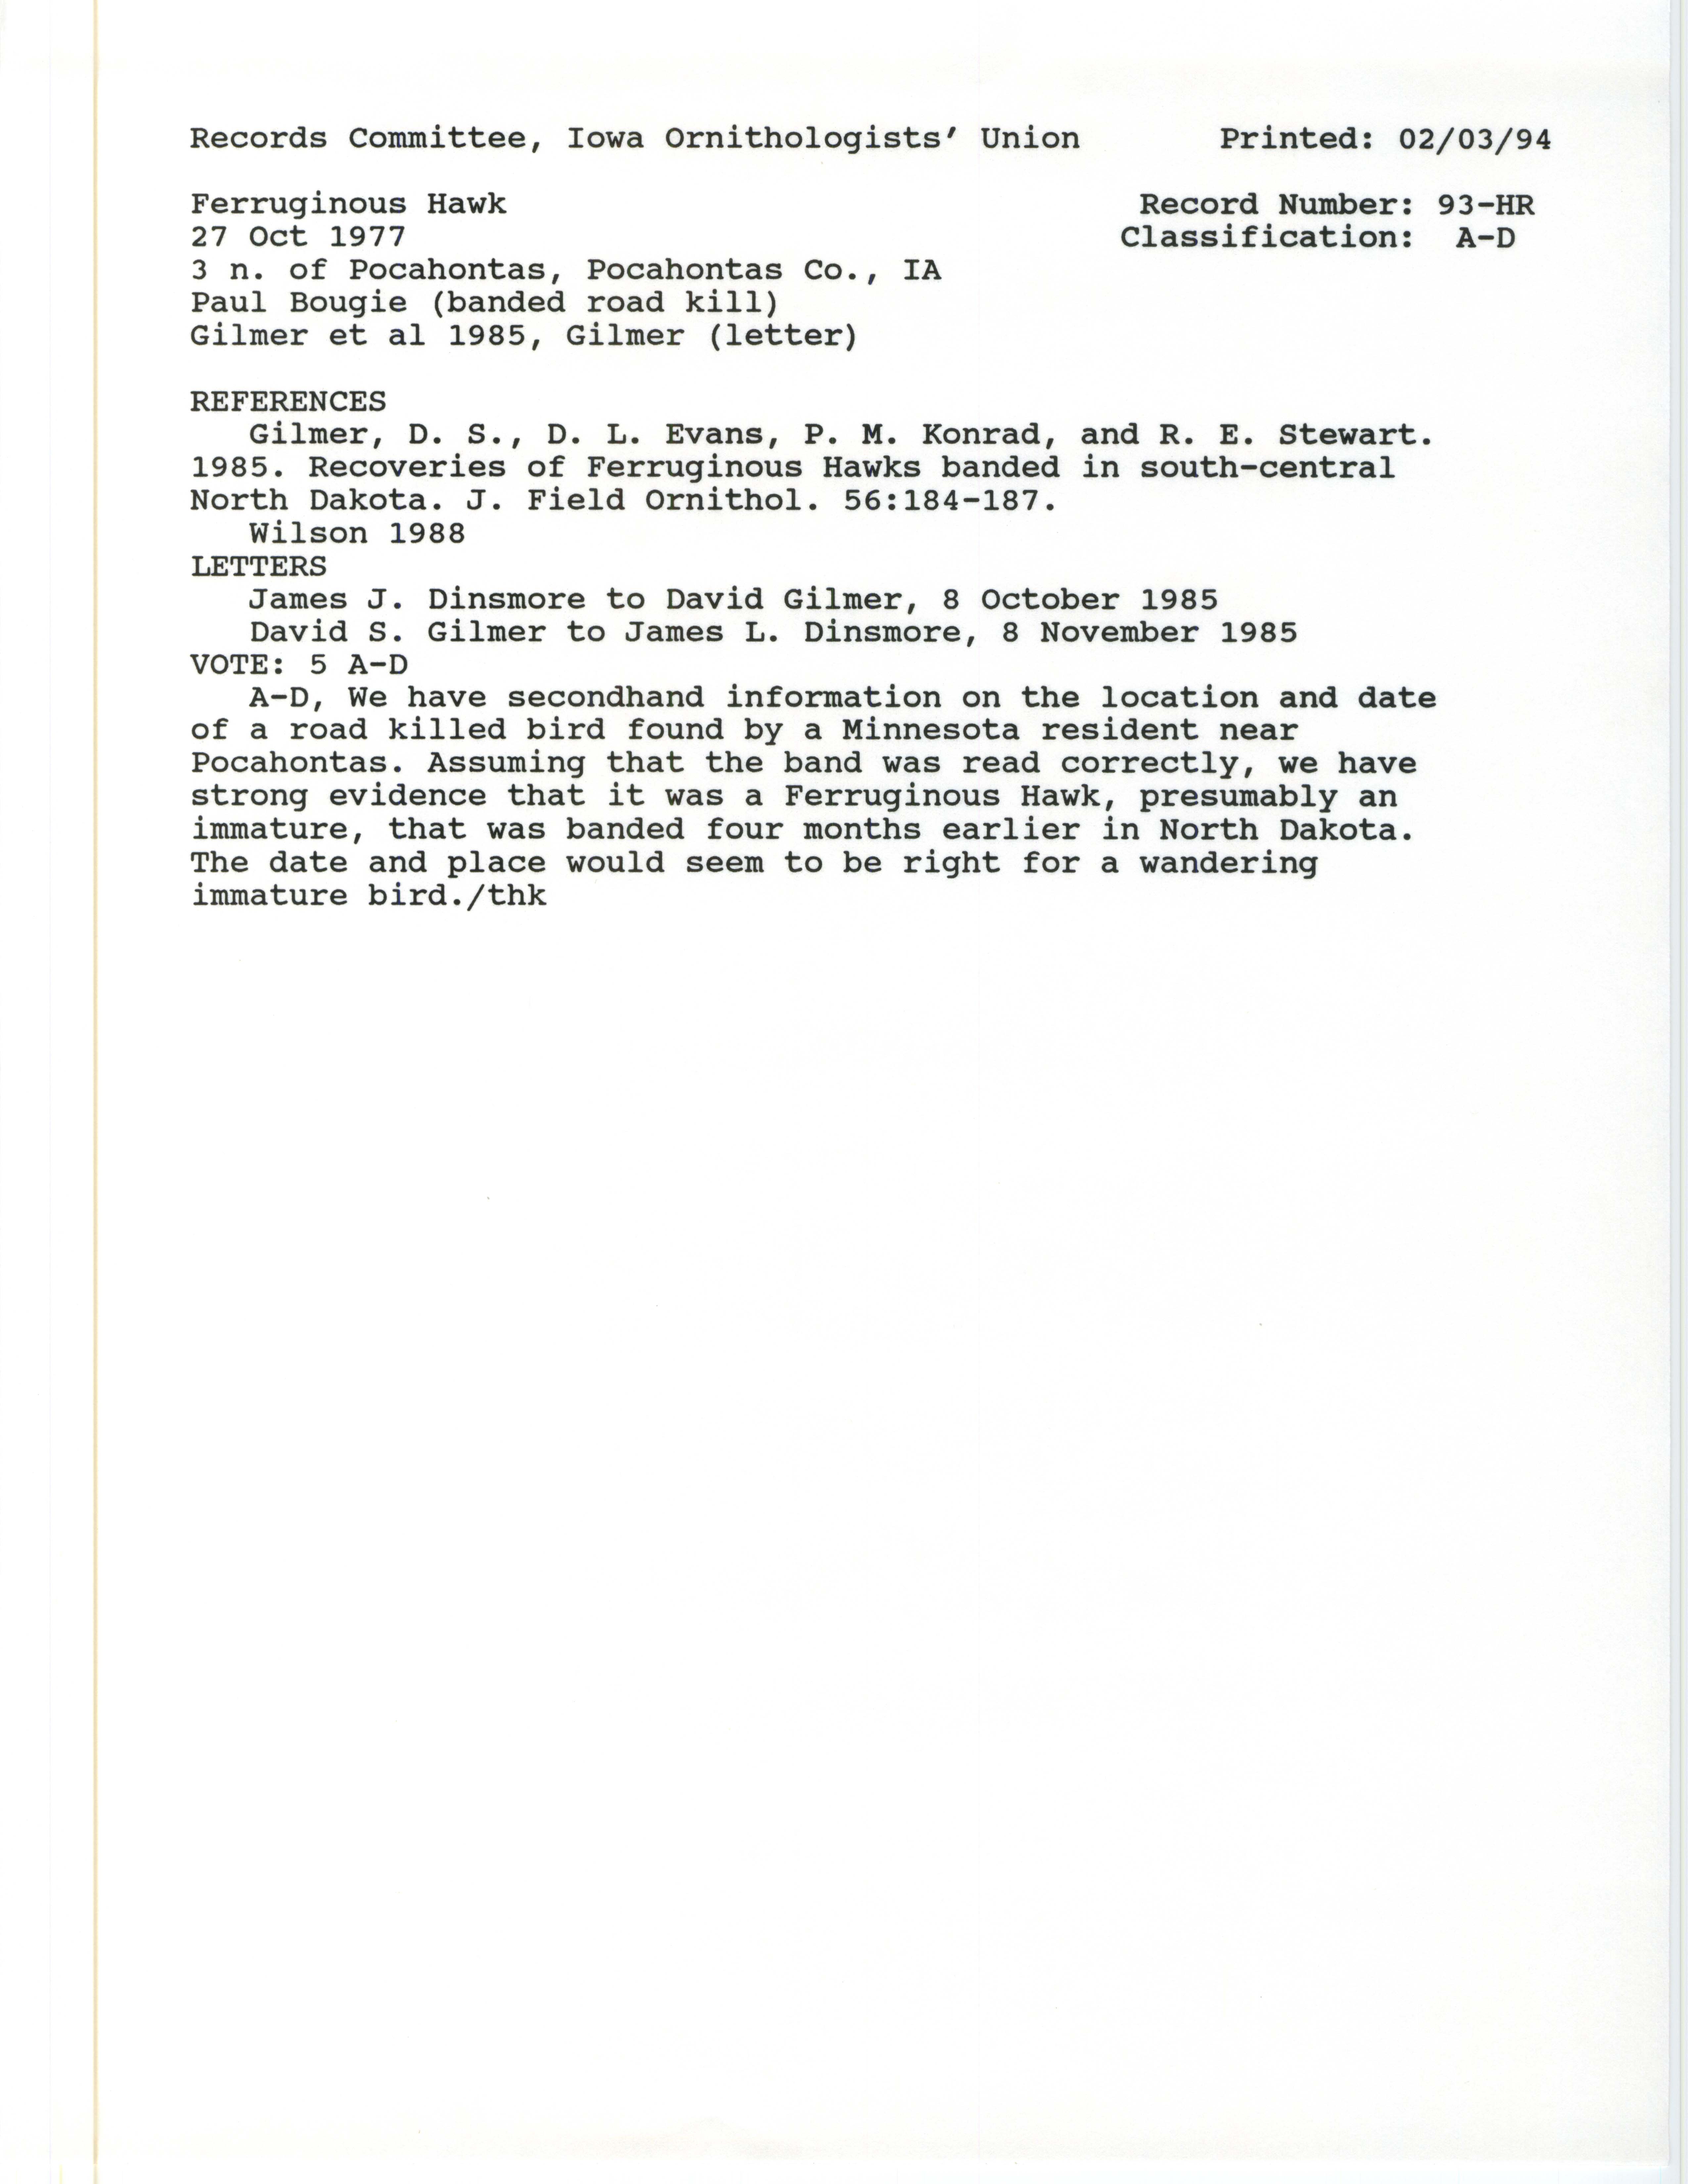 Records Committee review for rare bird sighting for Ferruginous Hawk north of Pocahontas in 1977